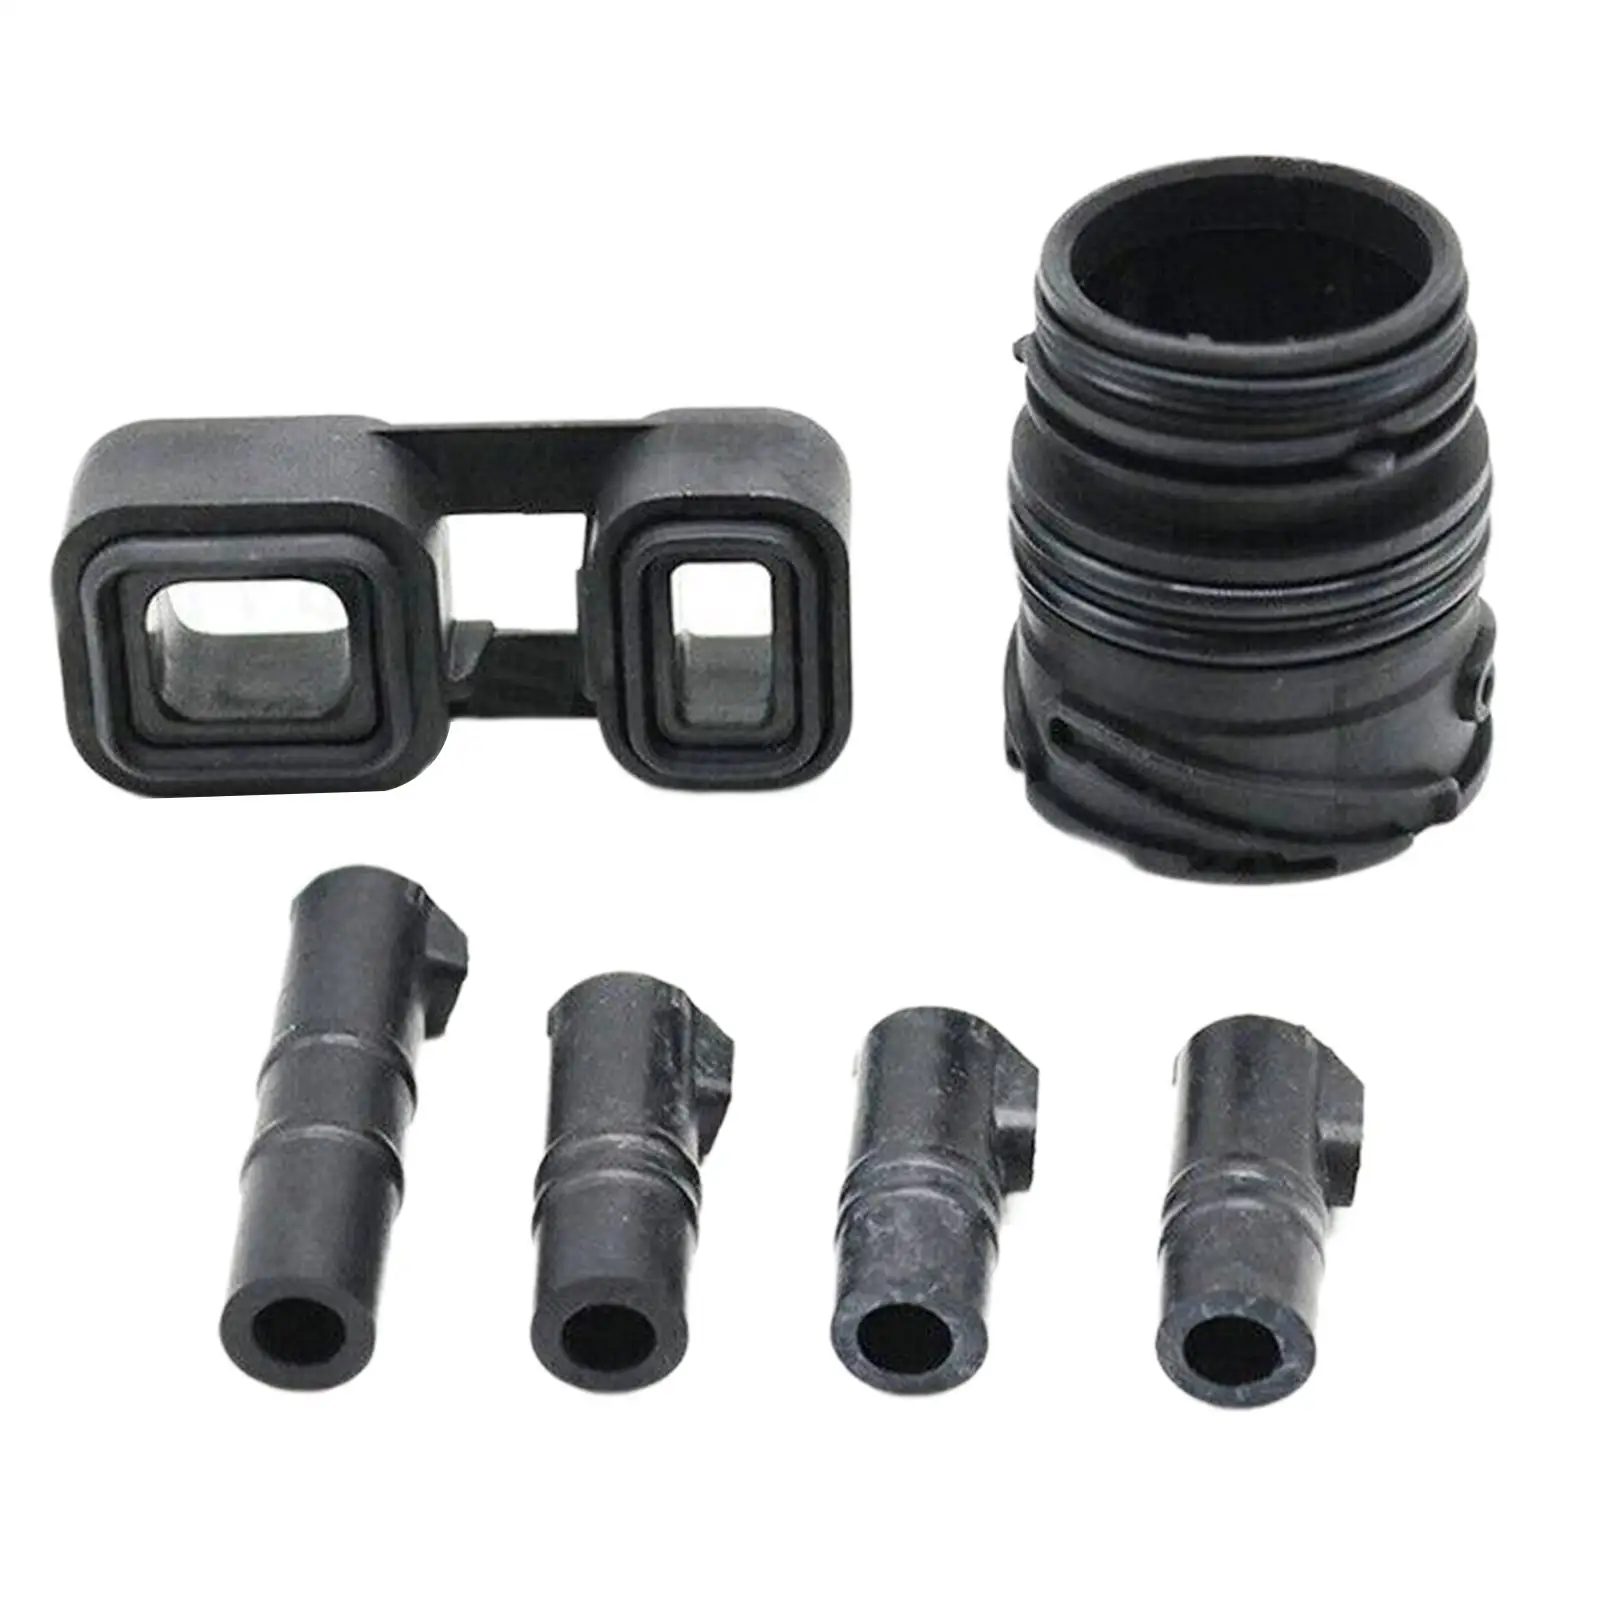 Sleeve and Adapter Seal Kit for BMW 1 Series 6HP34 Transmissions 6HP28